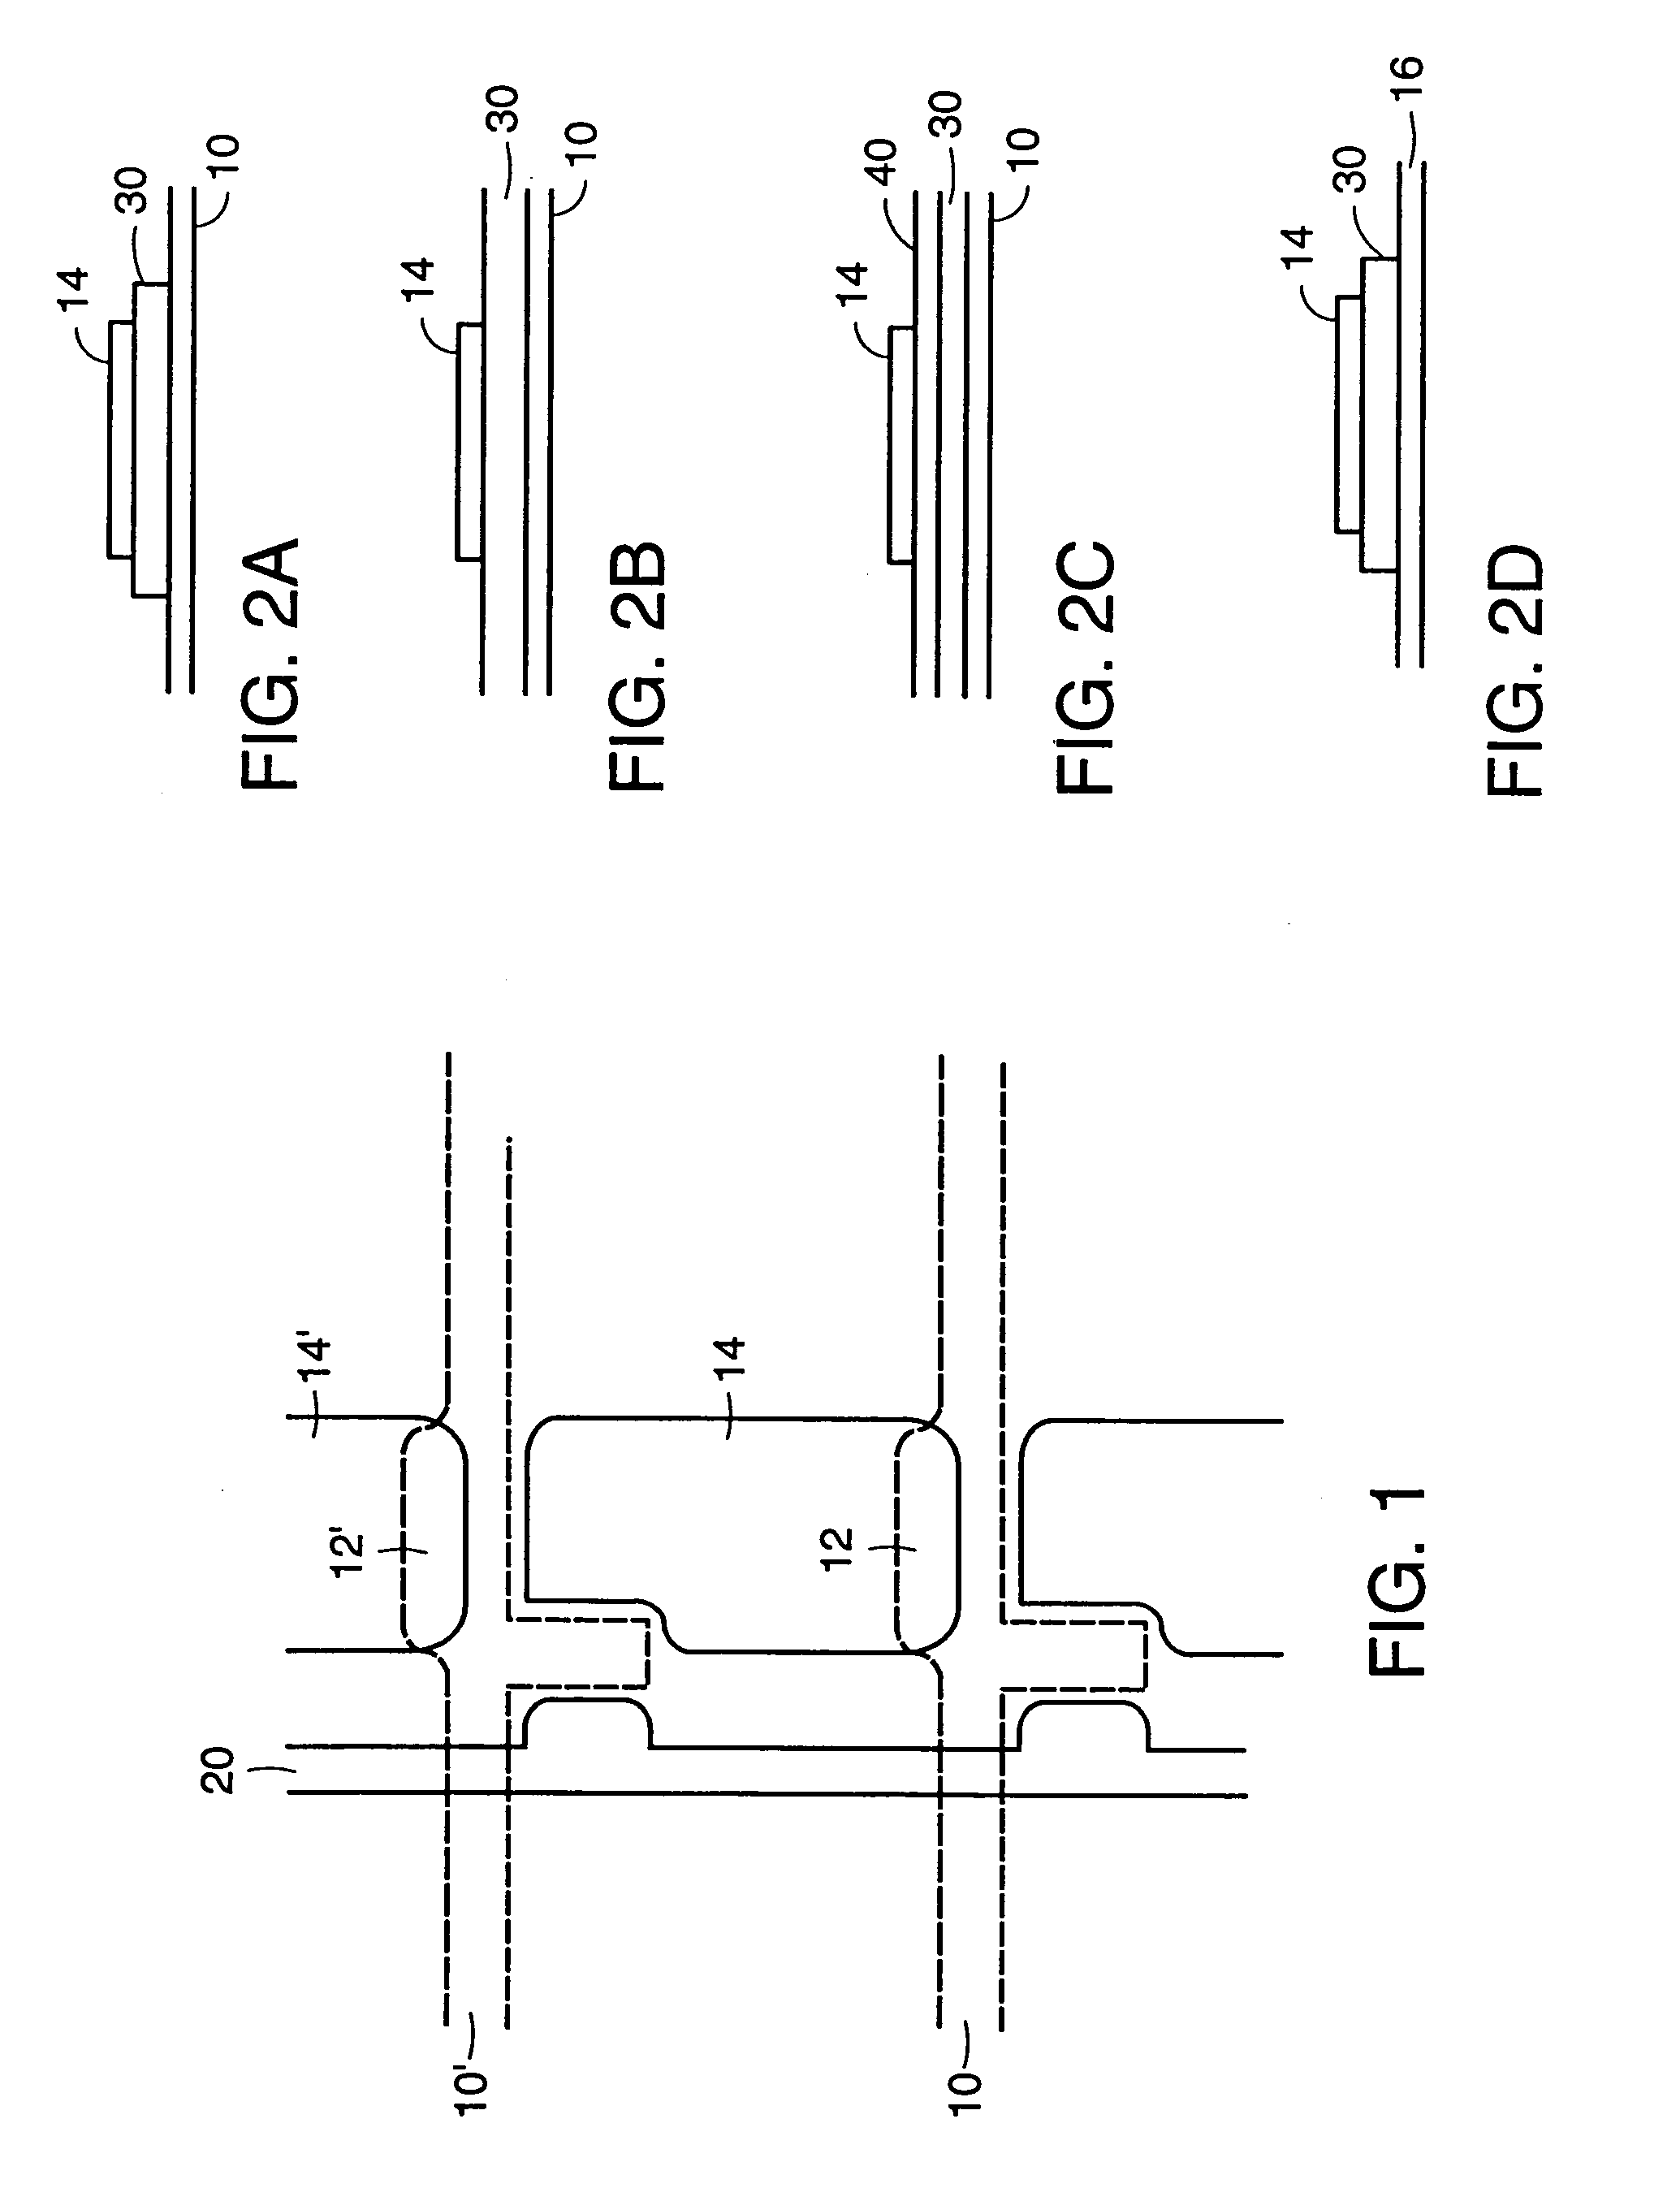 Use of a storage capacitor to enhance the performance of an active matrix driven electronic display